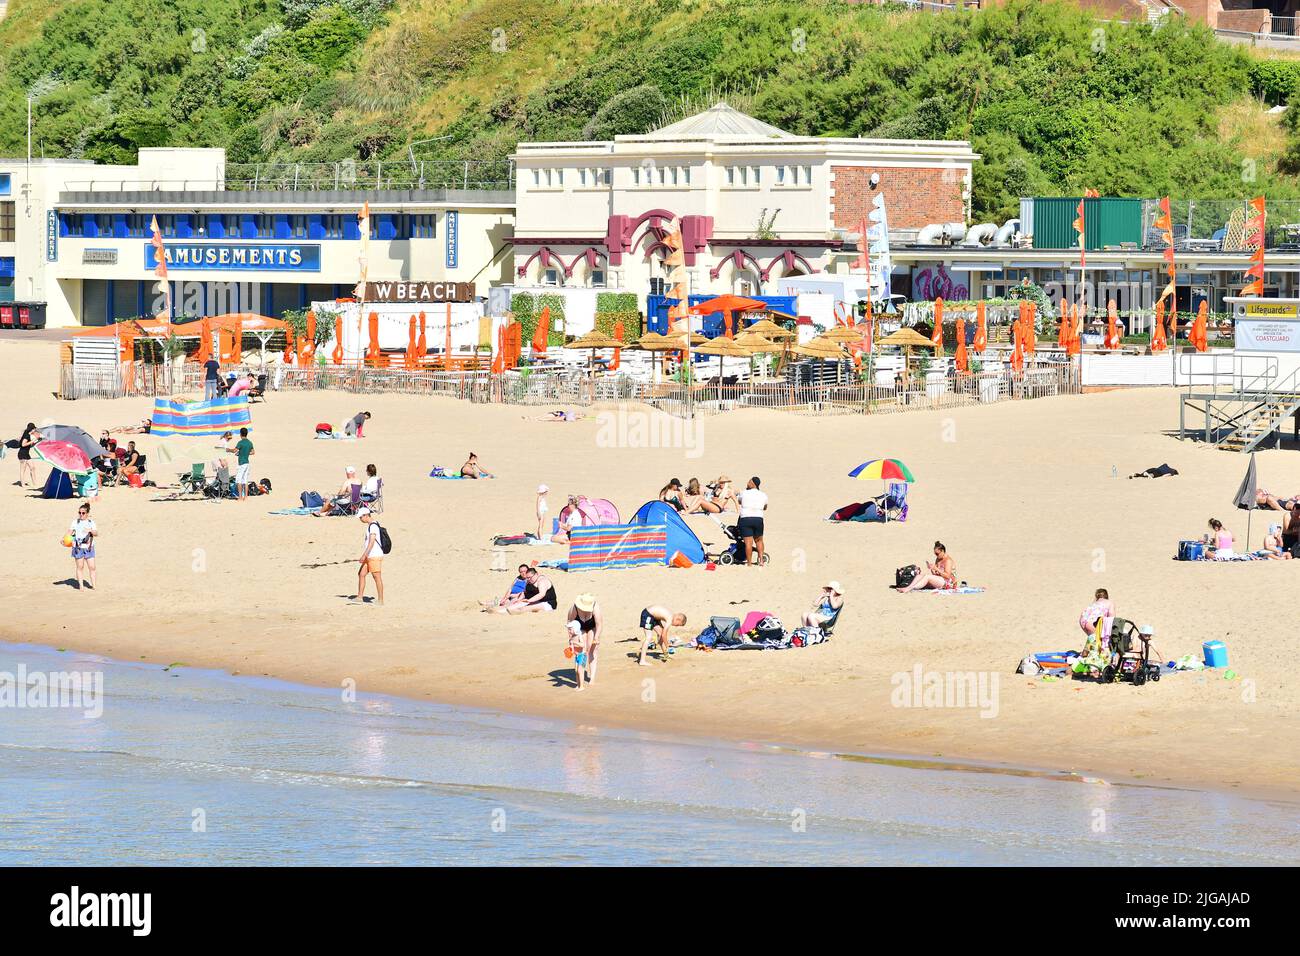 Bournemouth, Dorset, England, UK, 9th July 2022, Weather. Heatwave. People arrive at the beach before 9 am on Saturday morning. Temperatures will reach the high 20s by afternoon in wall-to-wall sunshine. Credit: Paul Biggins/Alamy Live News Stock Photo